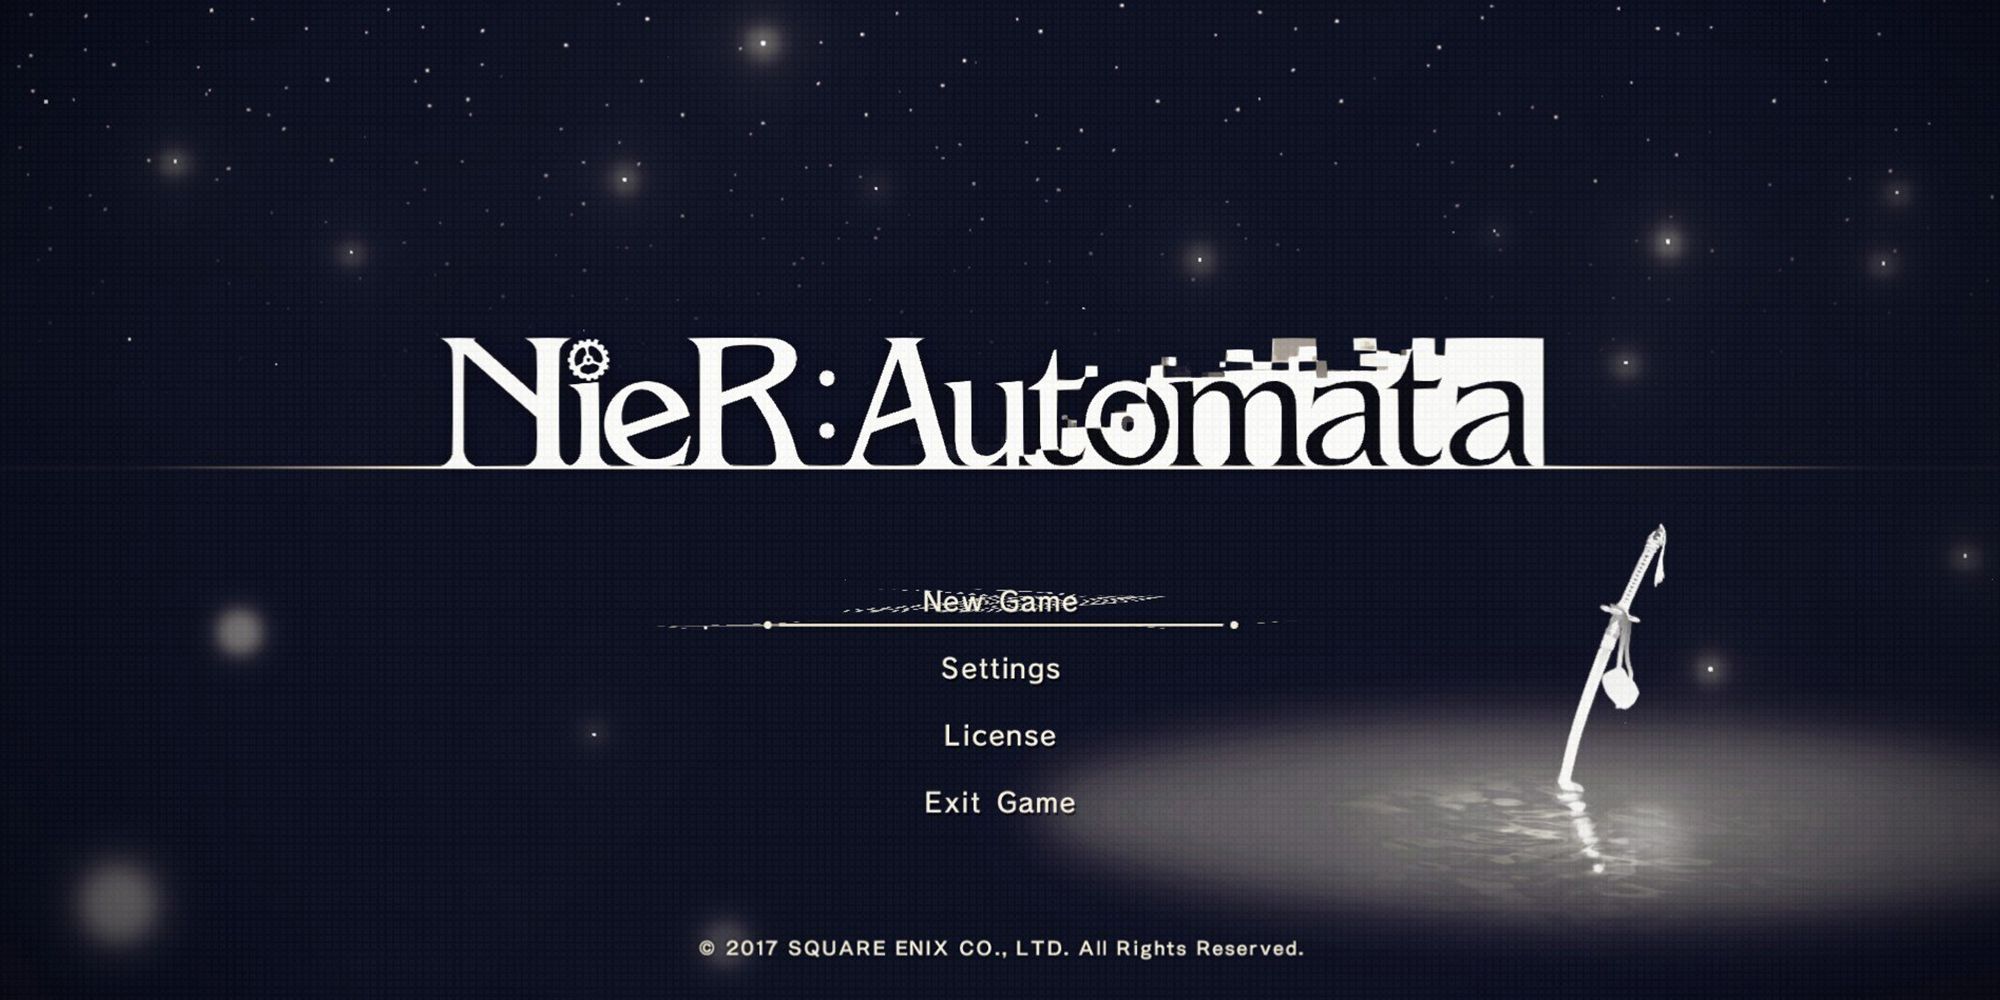 Nier Automata - Title Screen Starting The Game After Already Beating The Game Once